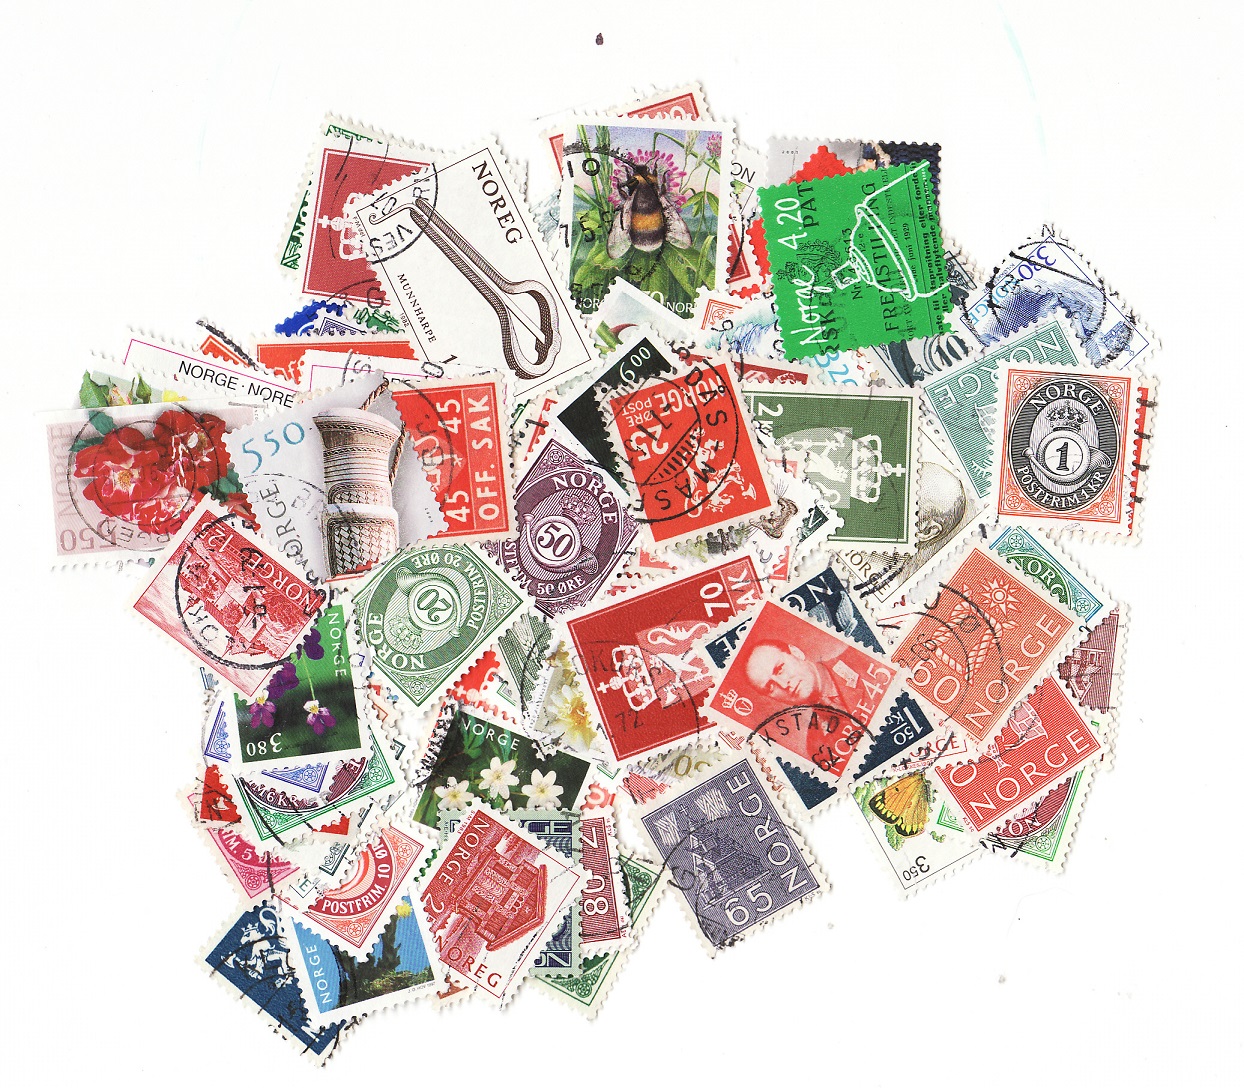 Norway Stamp Packet, 200 different stamps from Norway